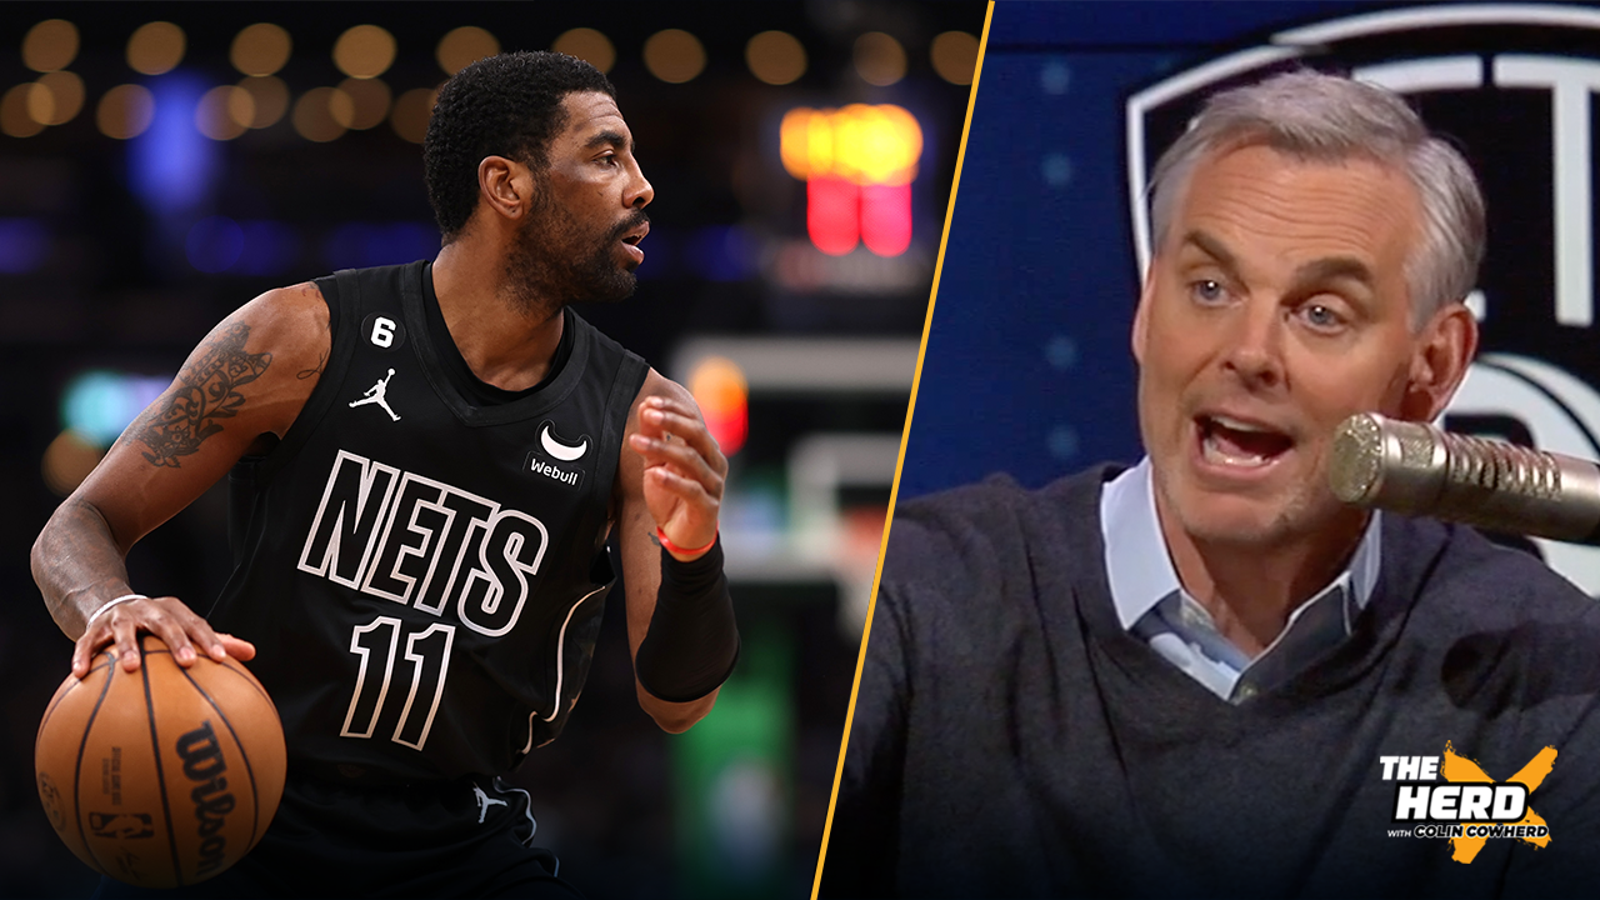 Colin Cowherd reacts to Kyrie Irving's trade request.